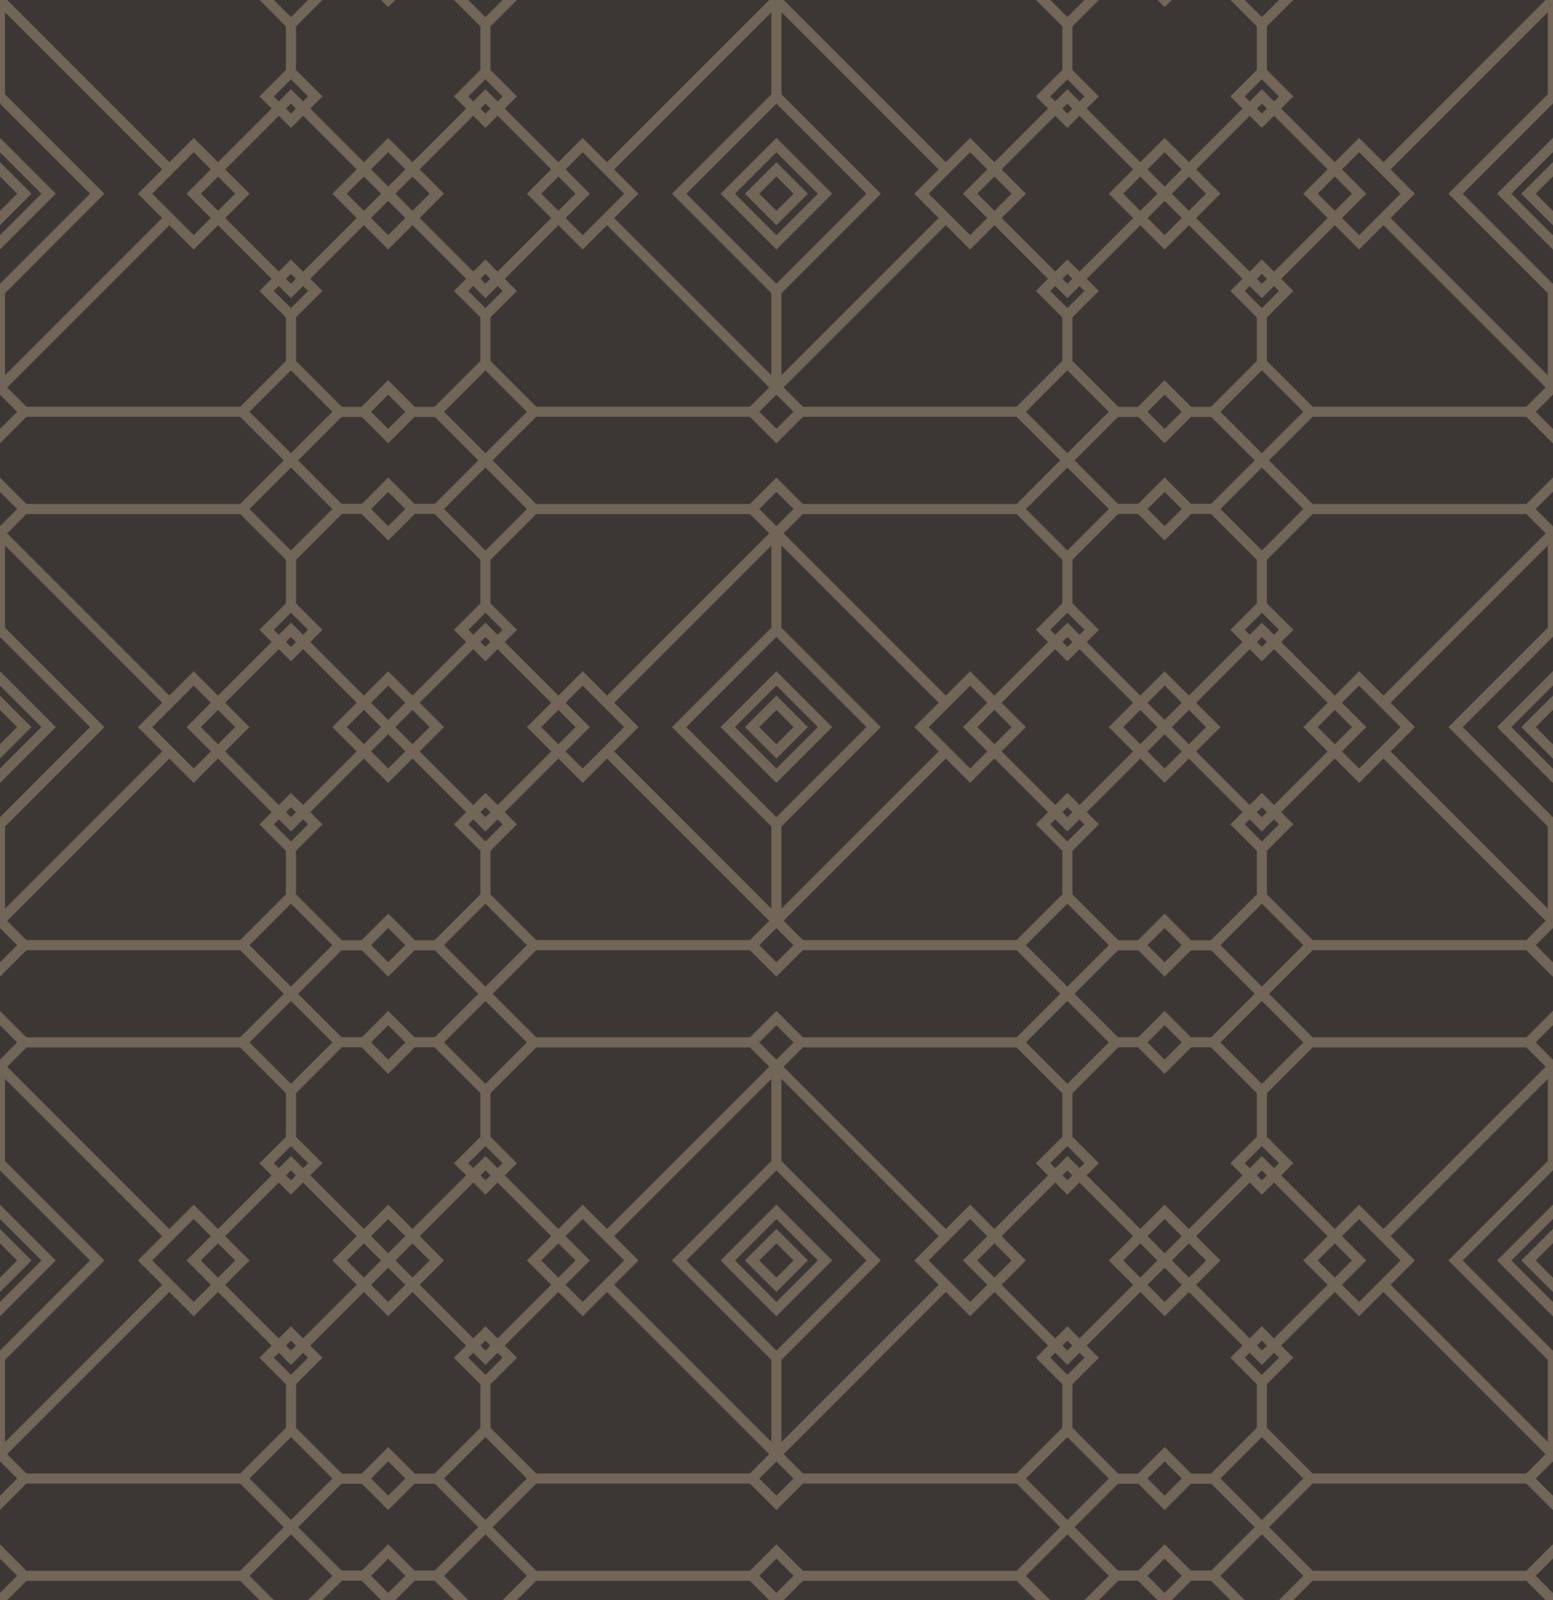 Seamless pattern. Linear elements. Repeating abstract background.